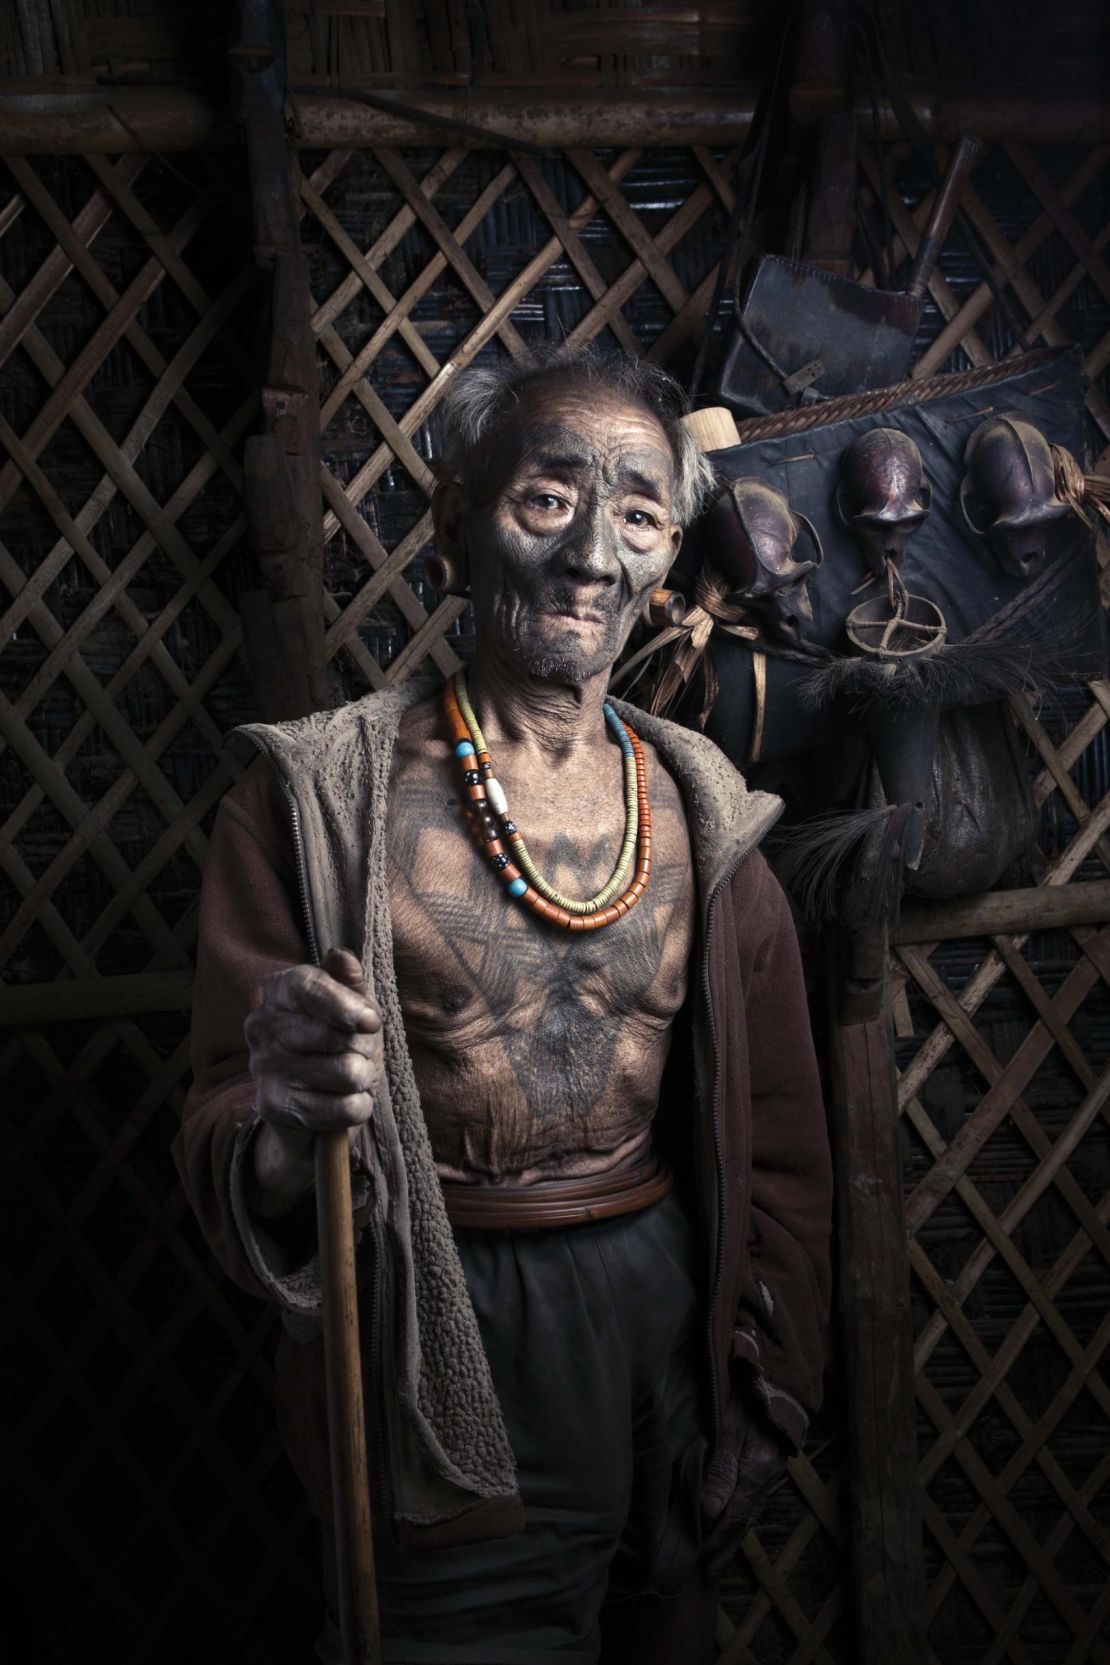 Bos captured many of the headhunters inside their traditional longhouses.